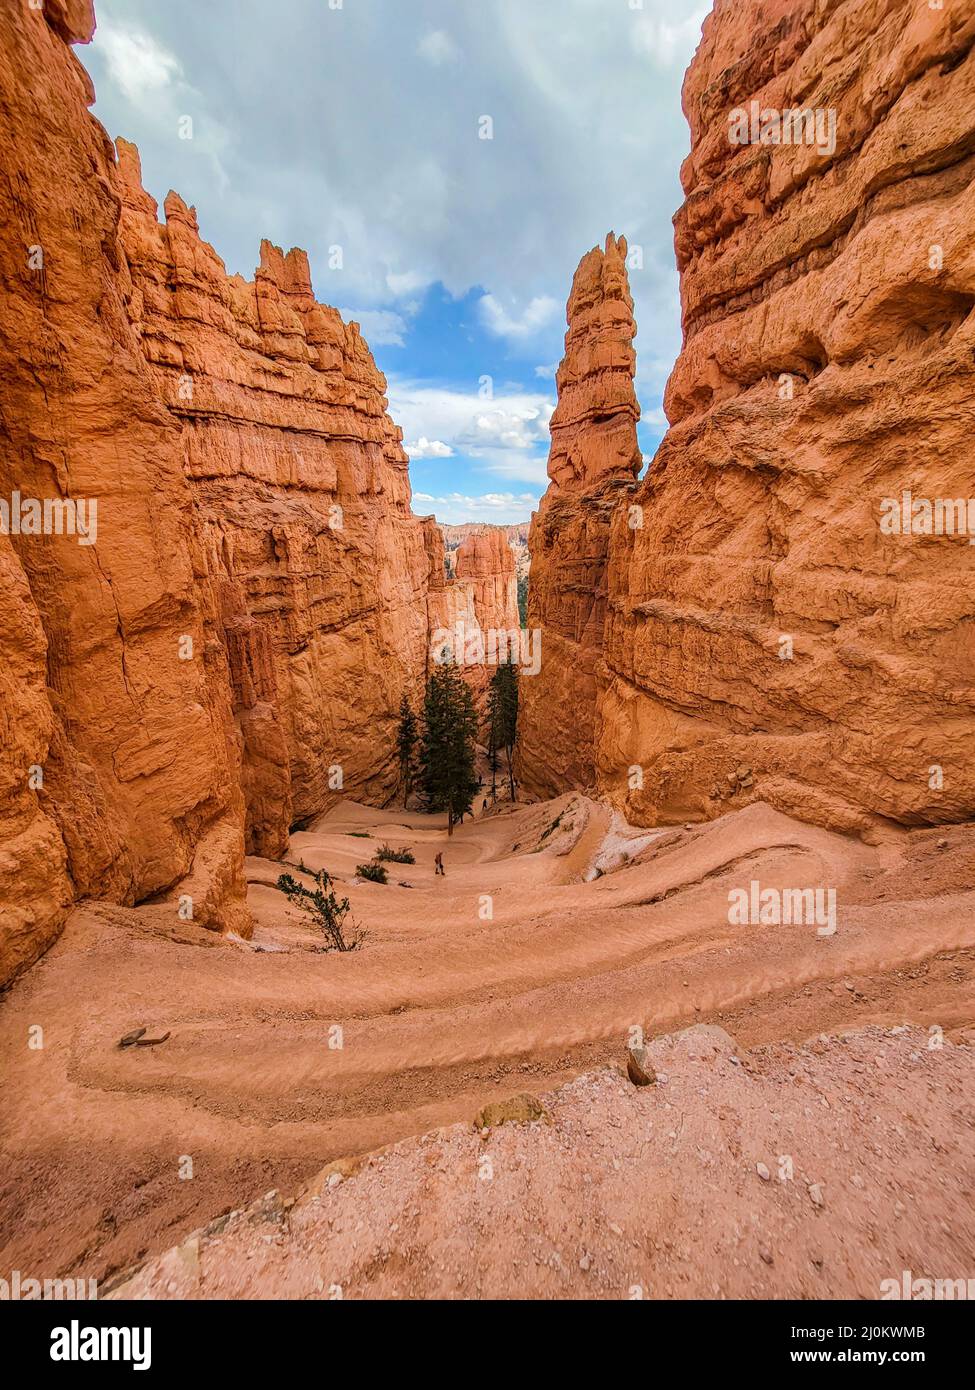 Bryce Canyon National Park Wall Street Foto Stock